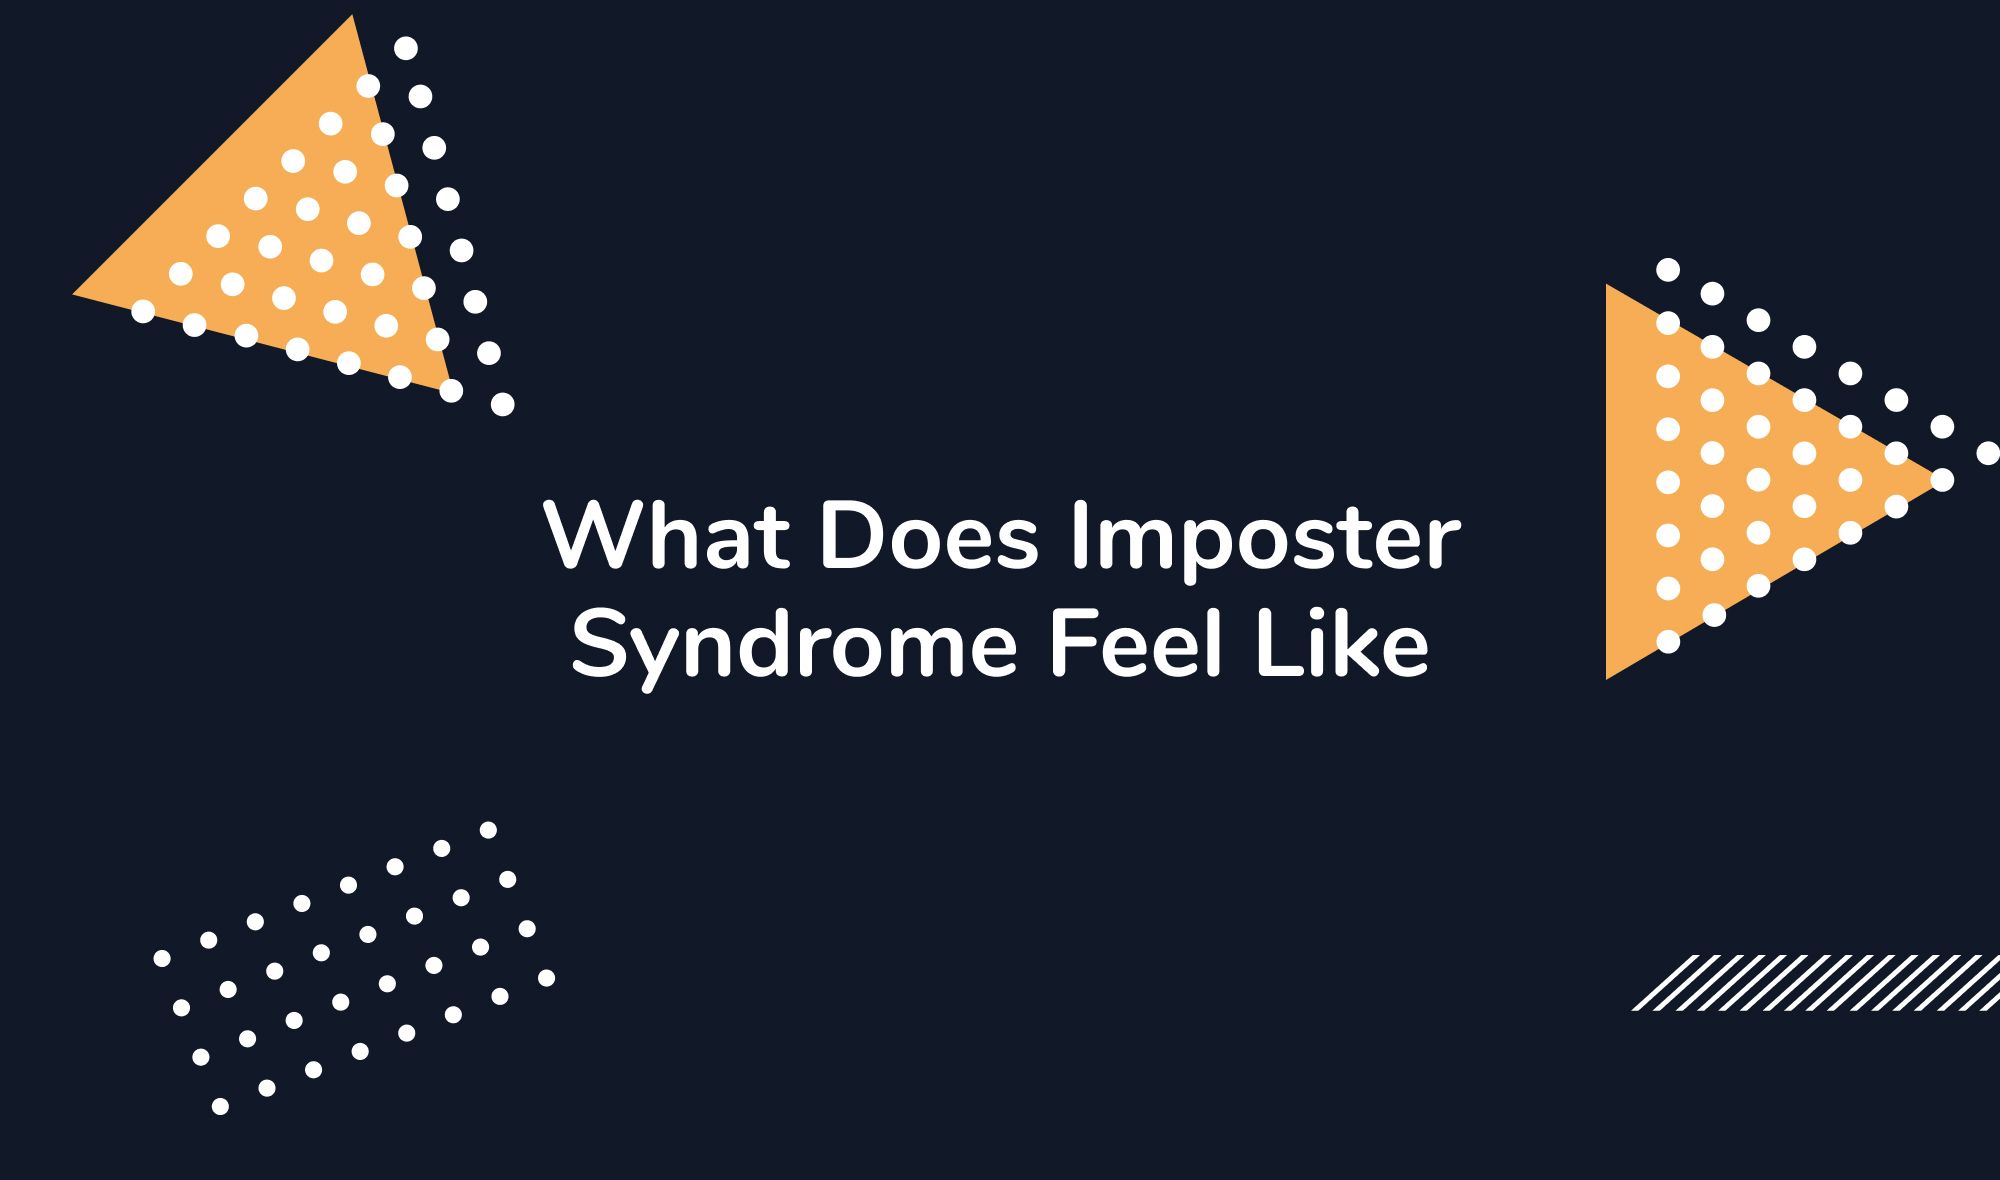 What Does Imposter Syndrome Feel Like: Symptoms and Thoughts